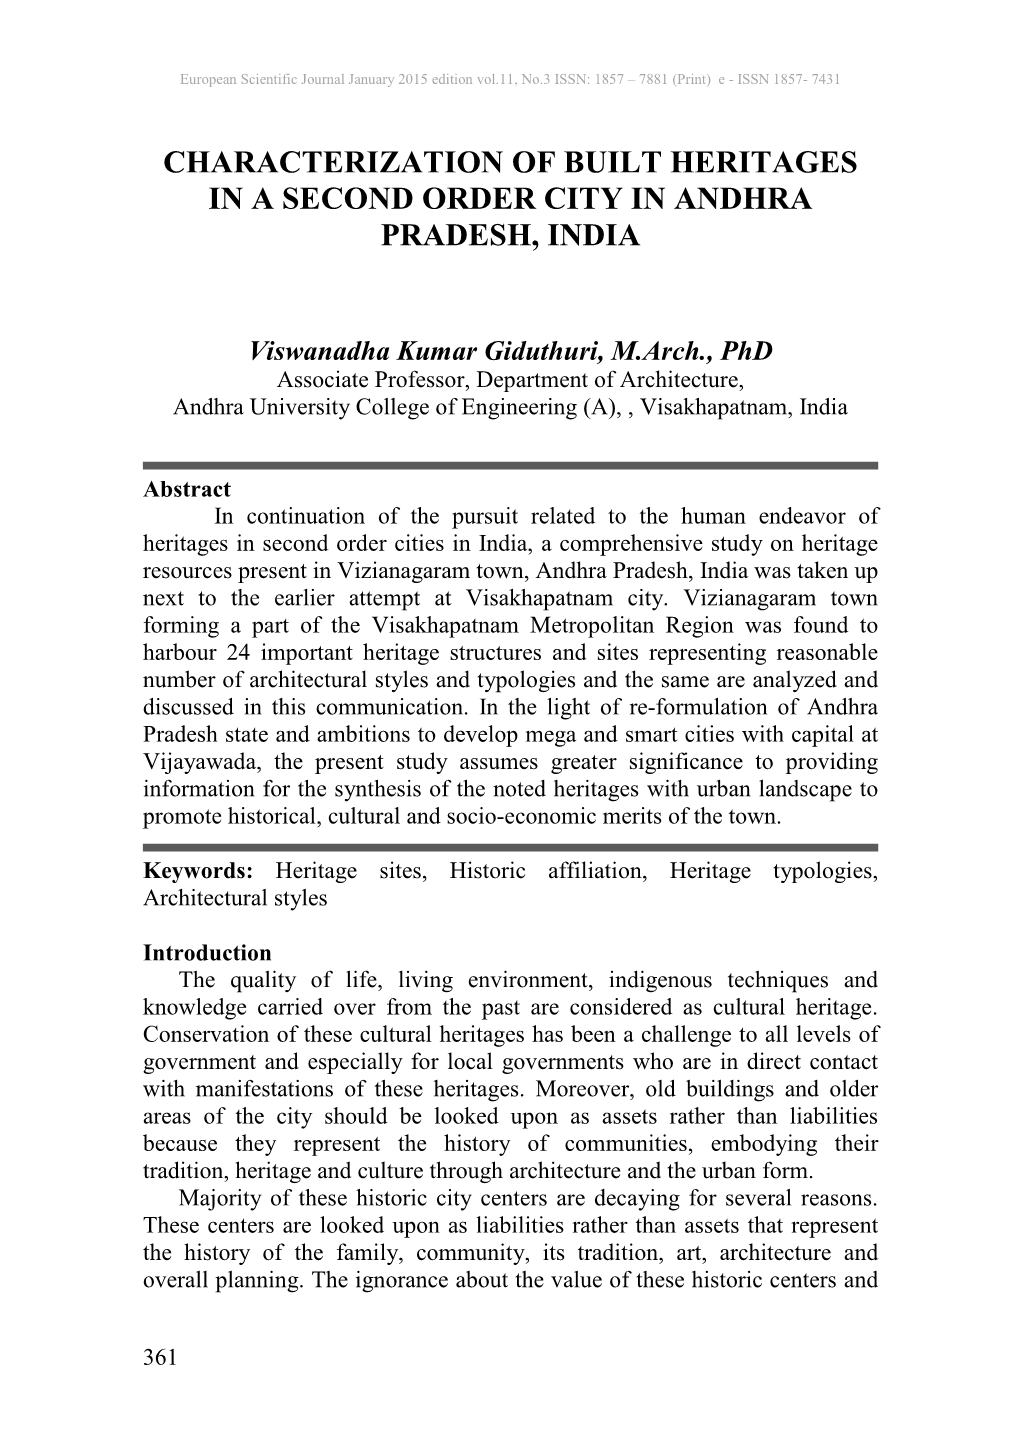 Characterization of Built Heritages in a Second Order City in Andhra Pradesh, India